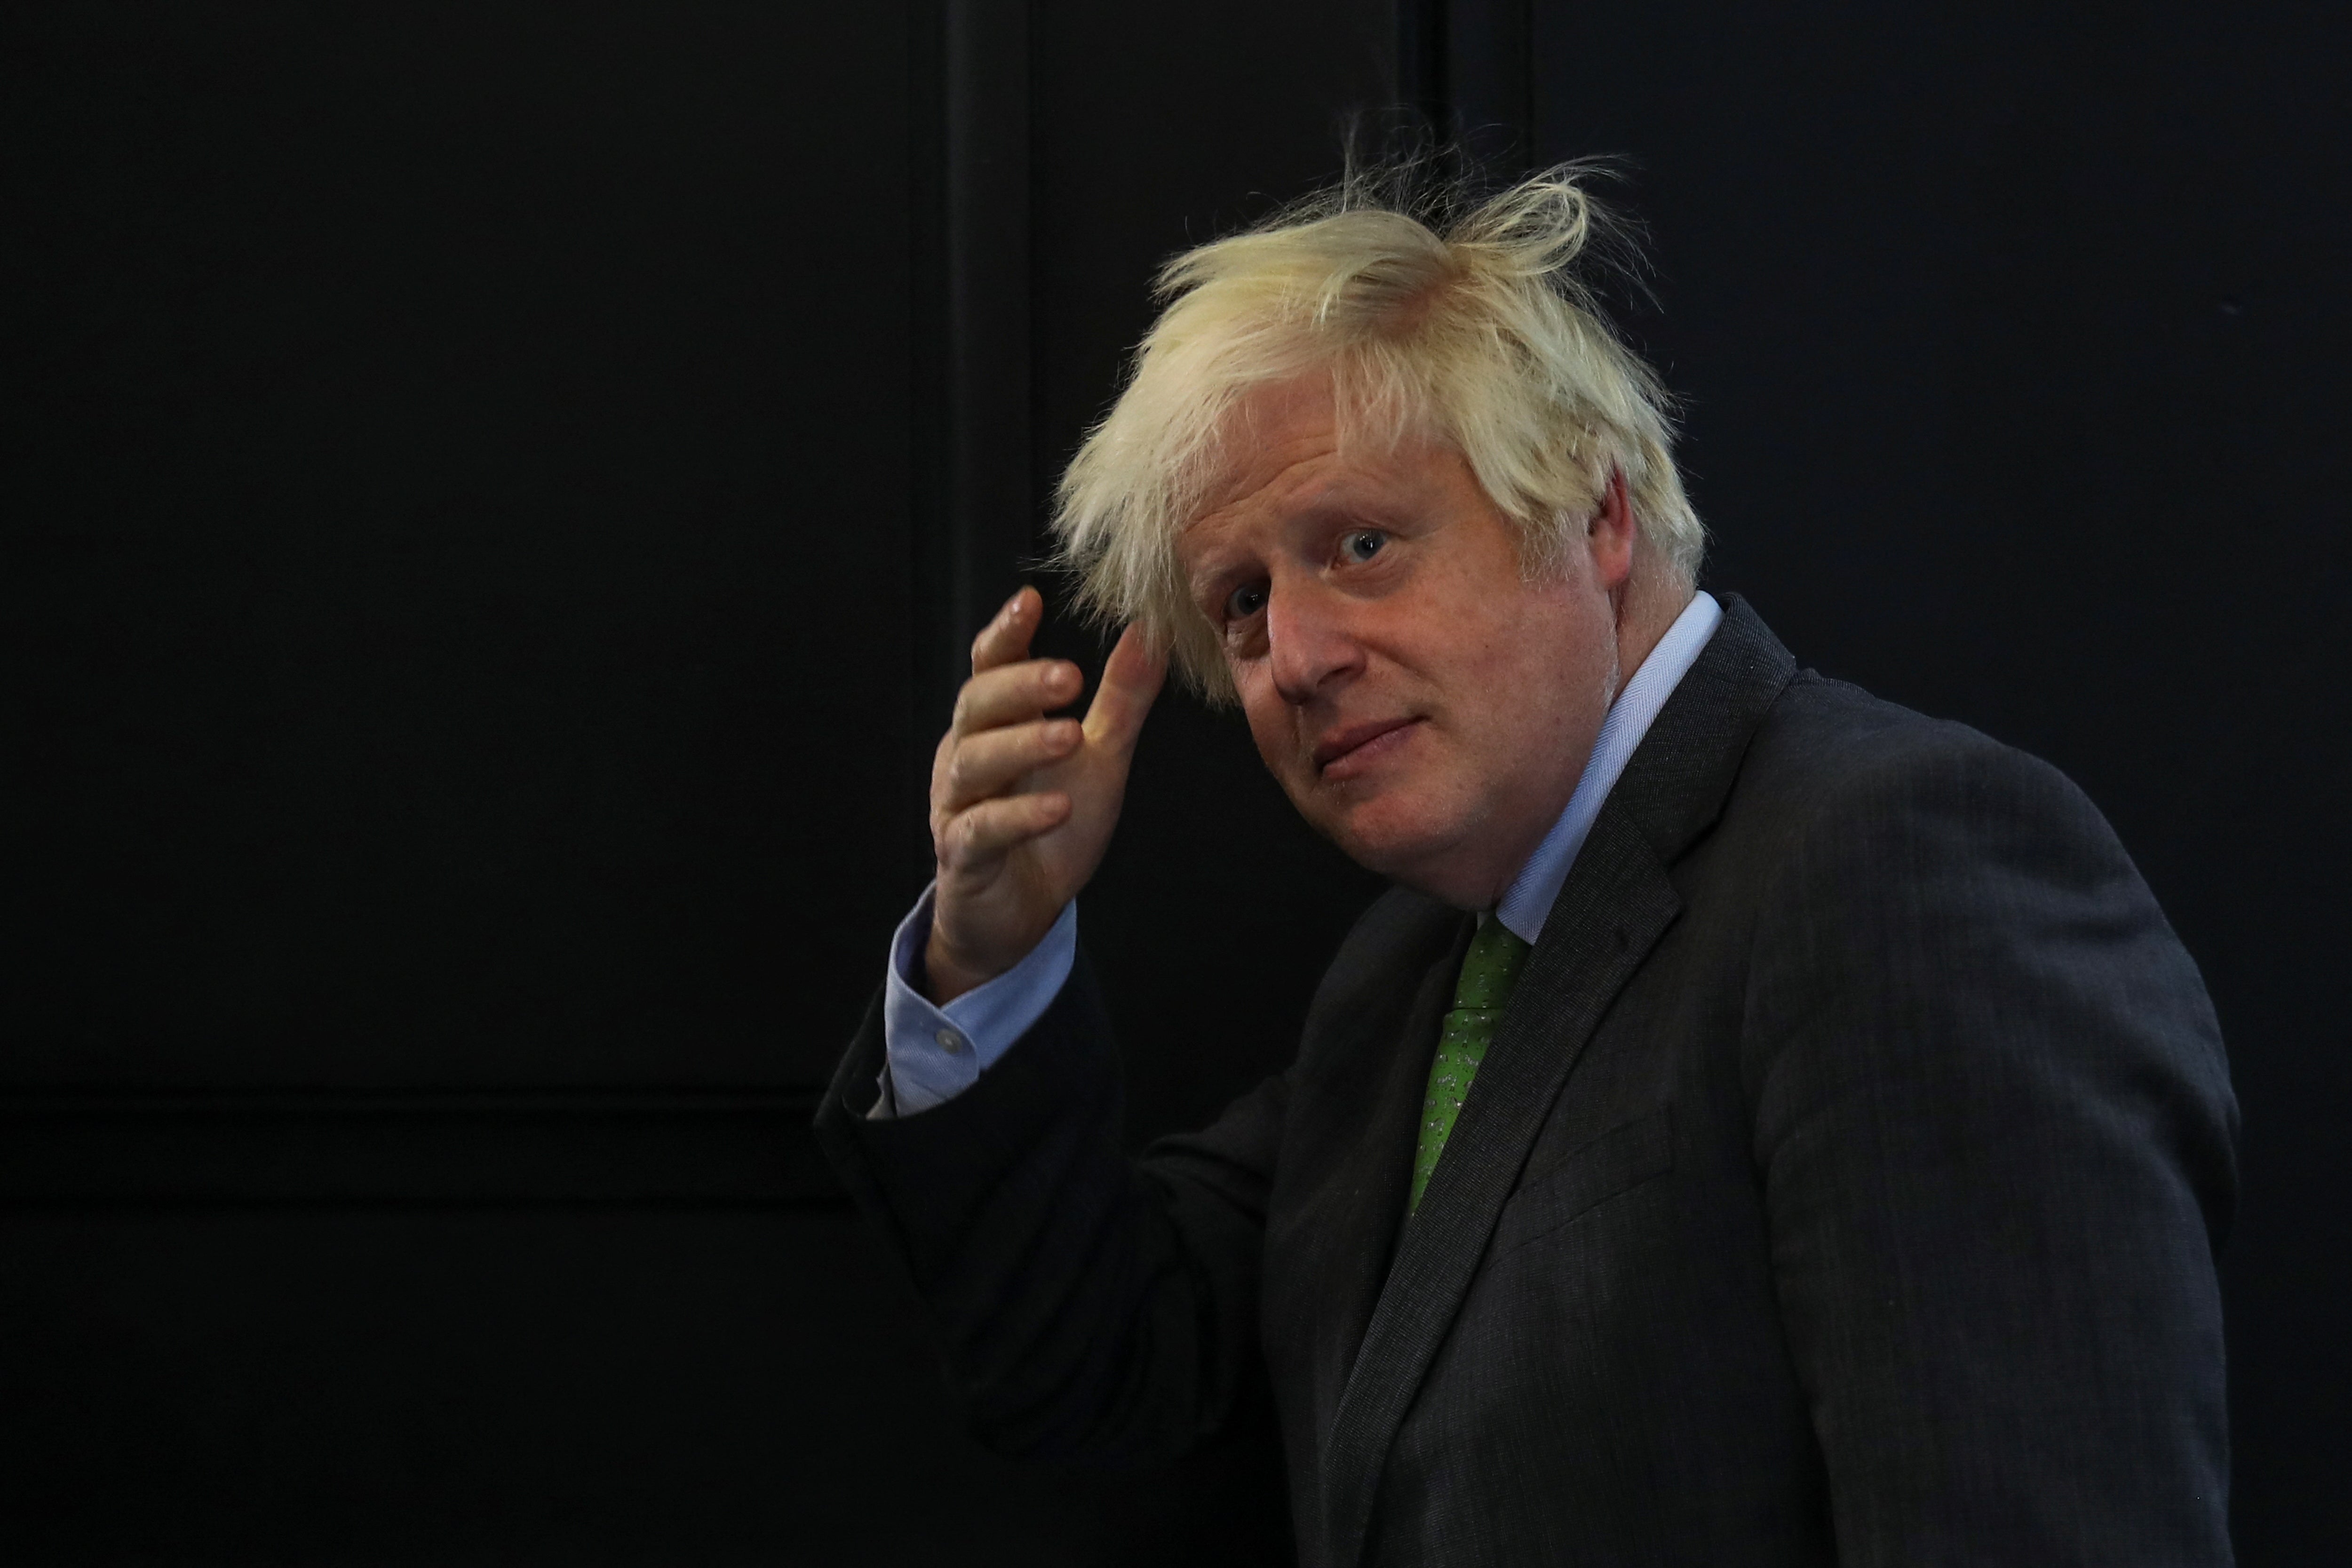 While he was editor of The Spectator , Boris Johnson had a secret four-year affair with Petronella Wyatt, who was one of his columnists